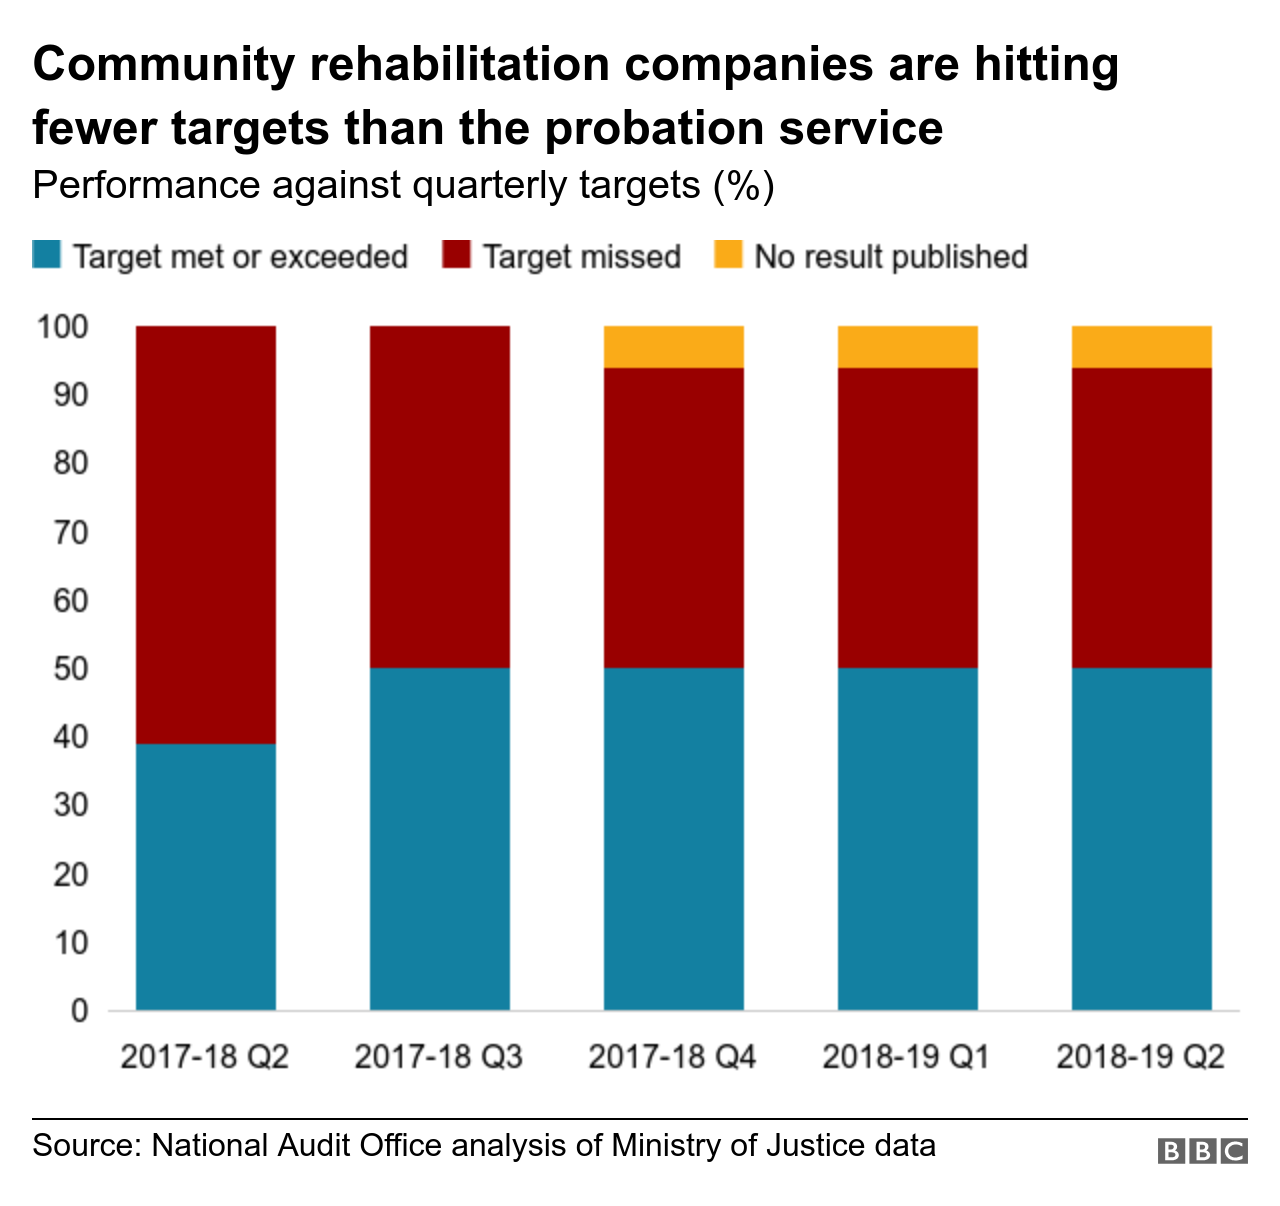 Chart showing how community rehabilitation services are missing more targets